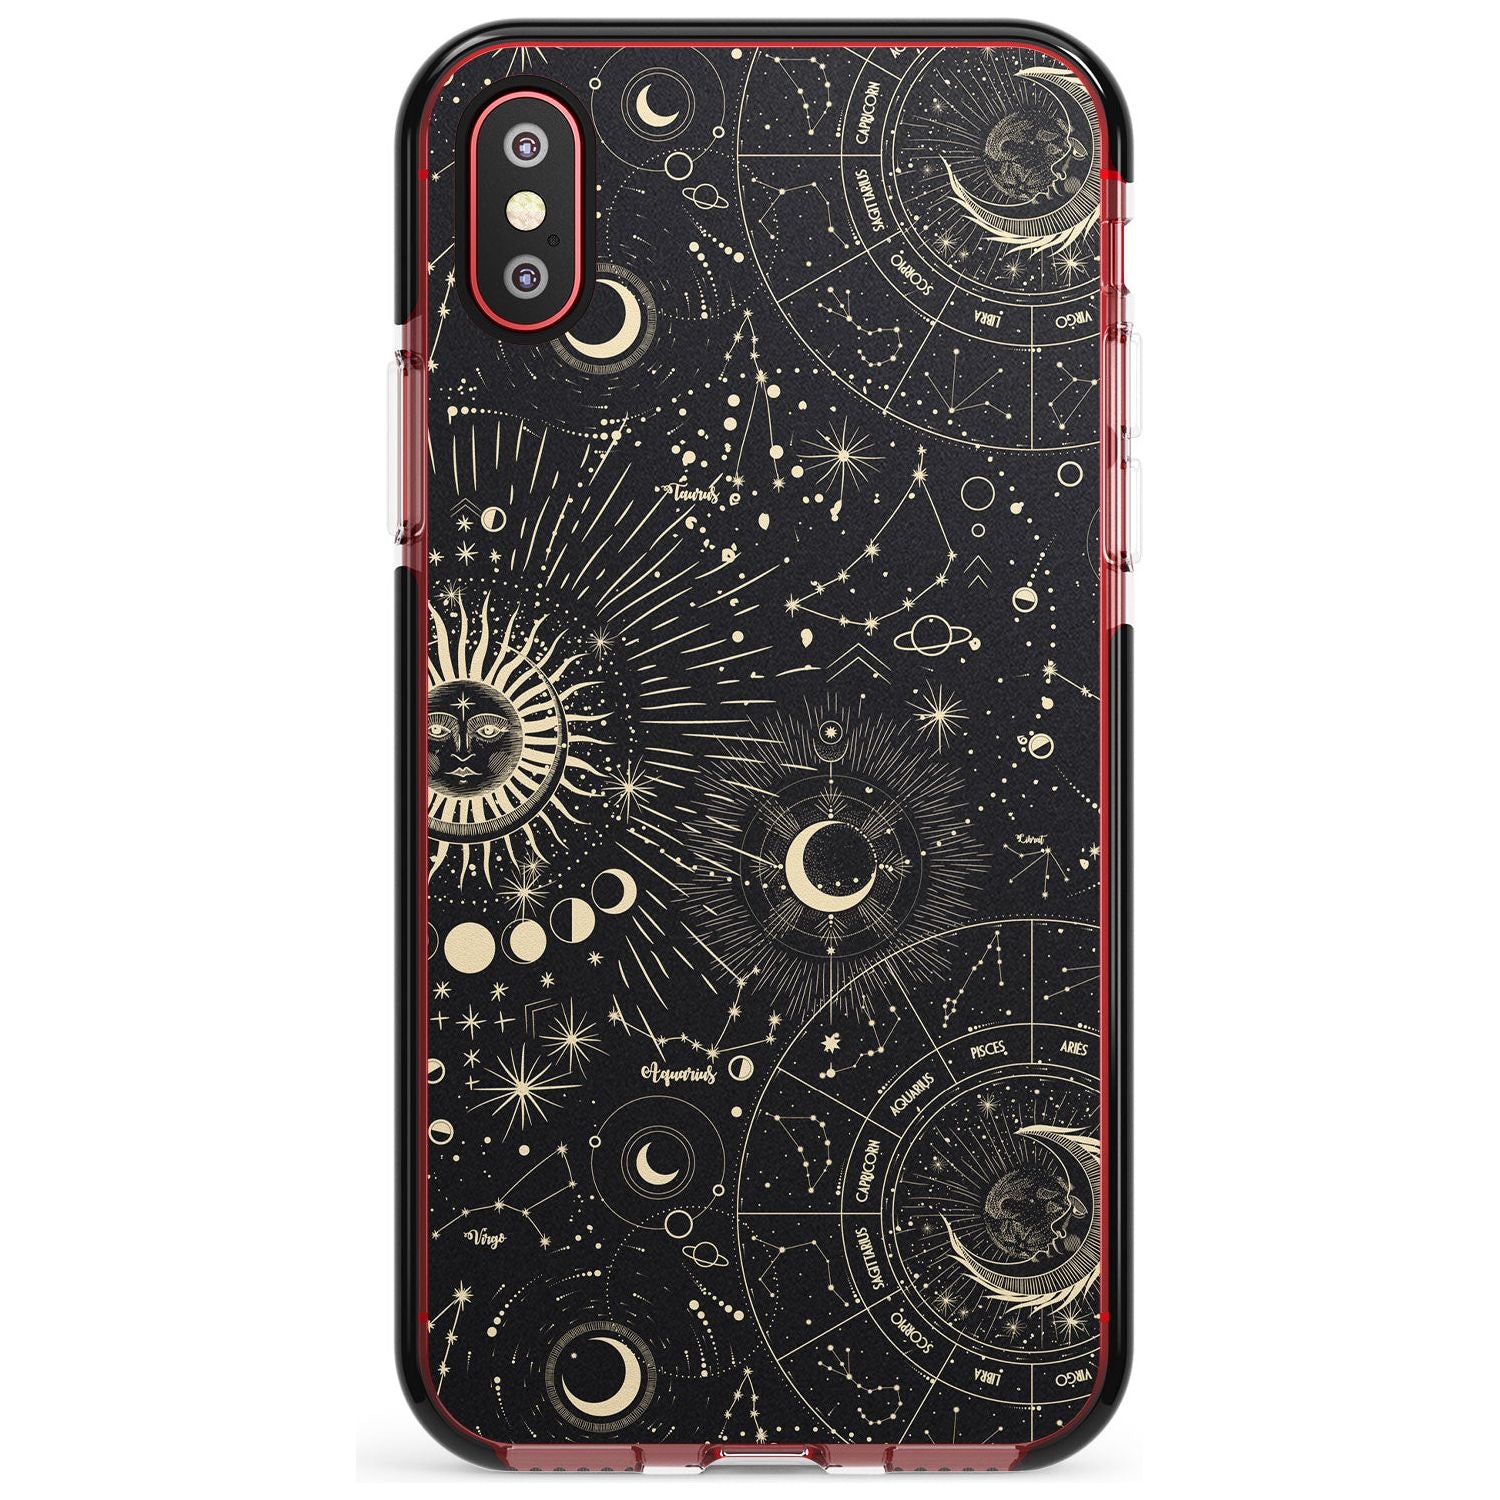 Suns & Zodiac Charts Pink Fade Impact Phone Case for iPhone X XS Max XR